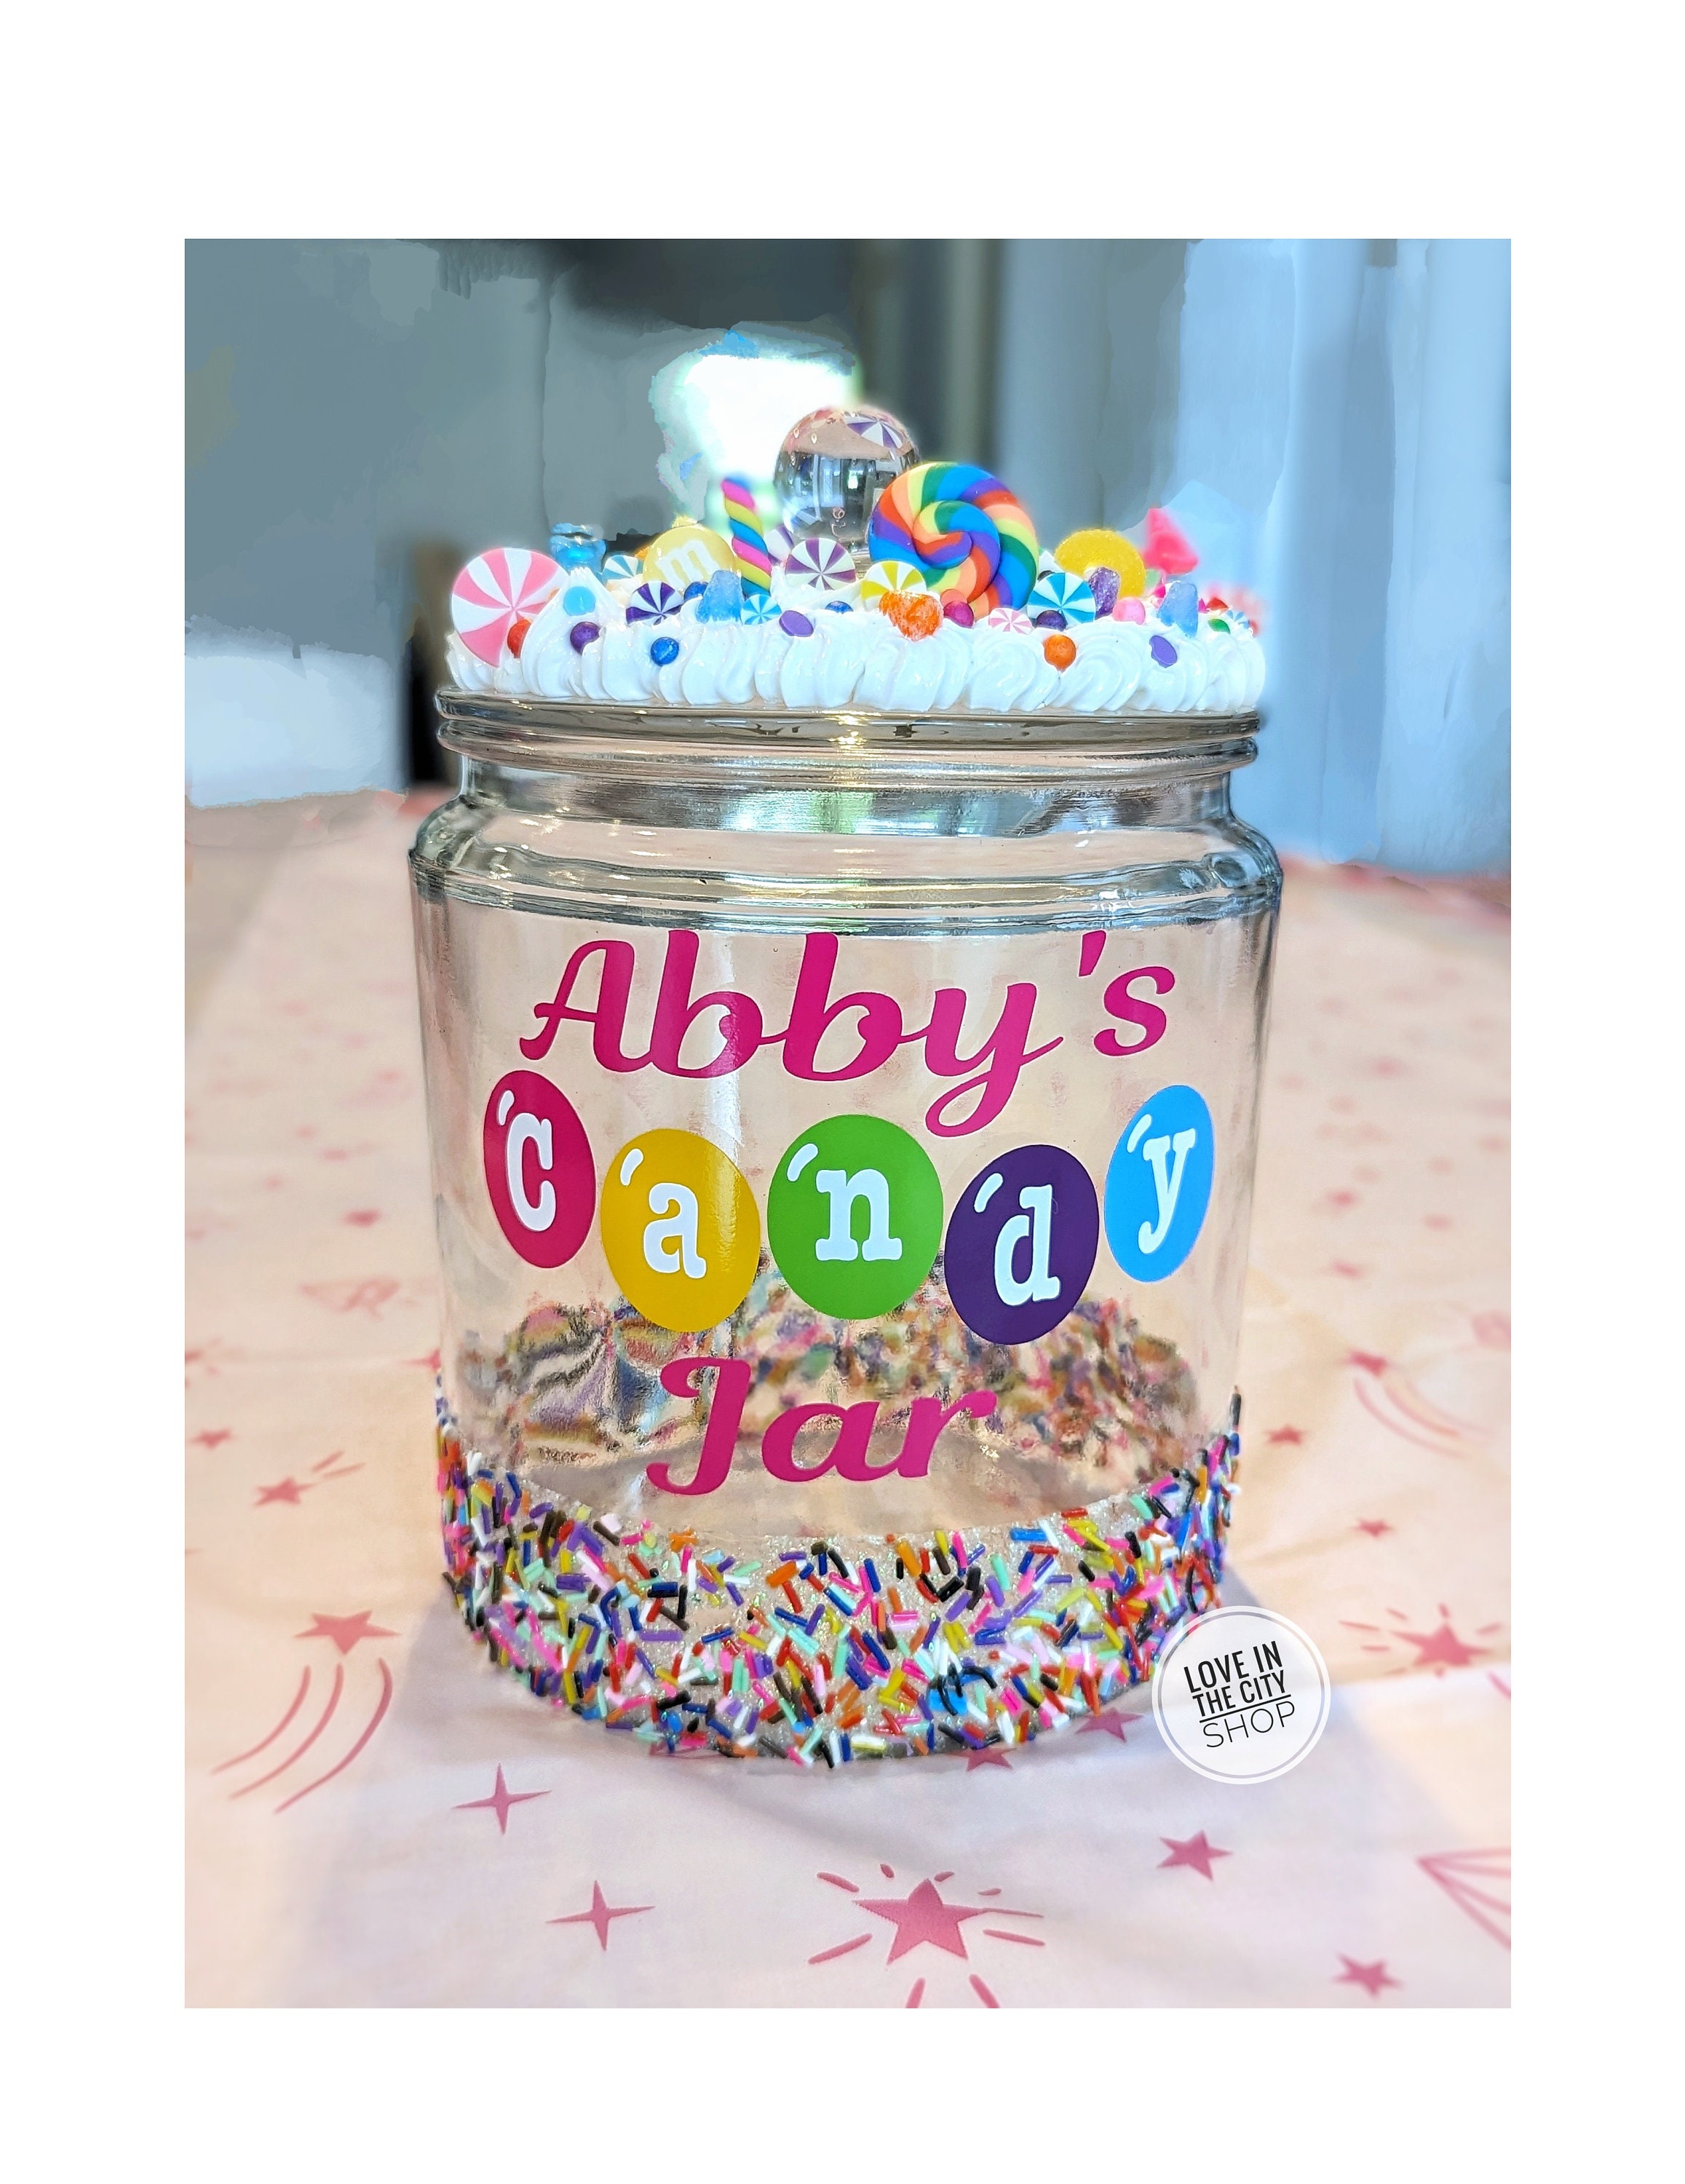 Personalized Large Glass Candy Jar With Lid, Office Receptionist